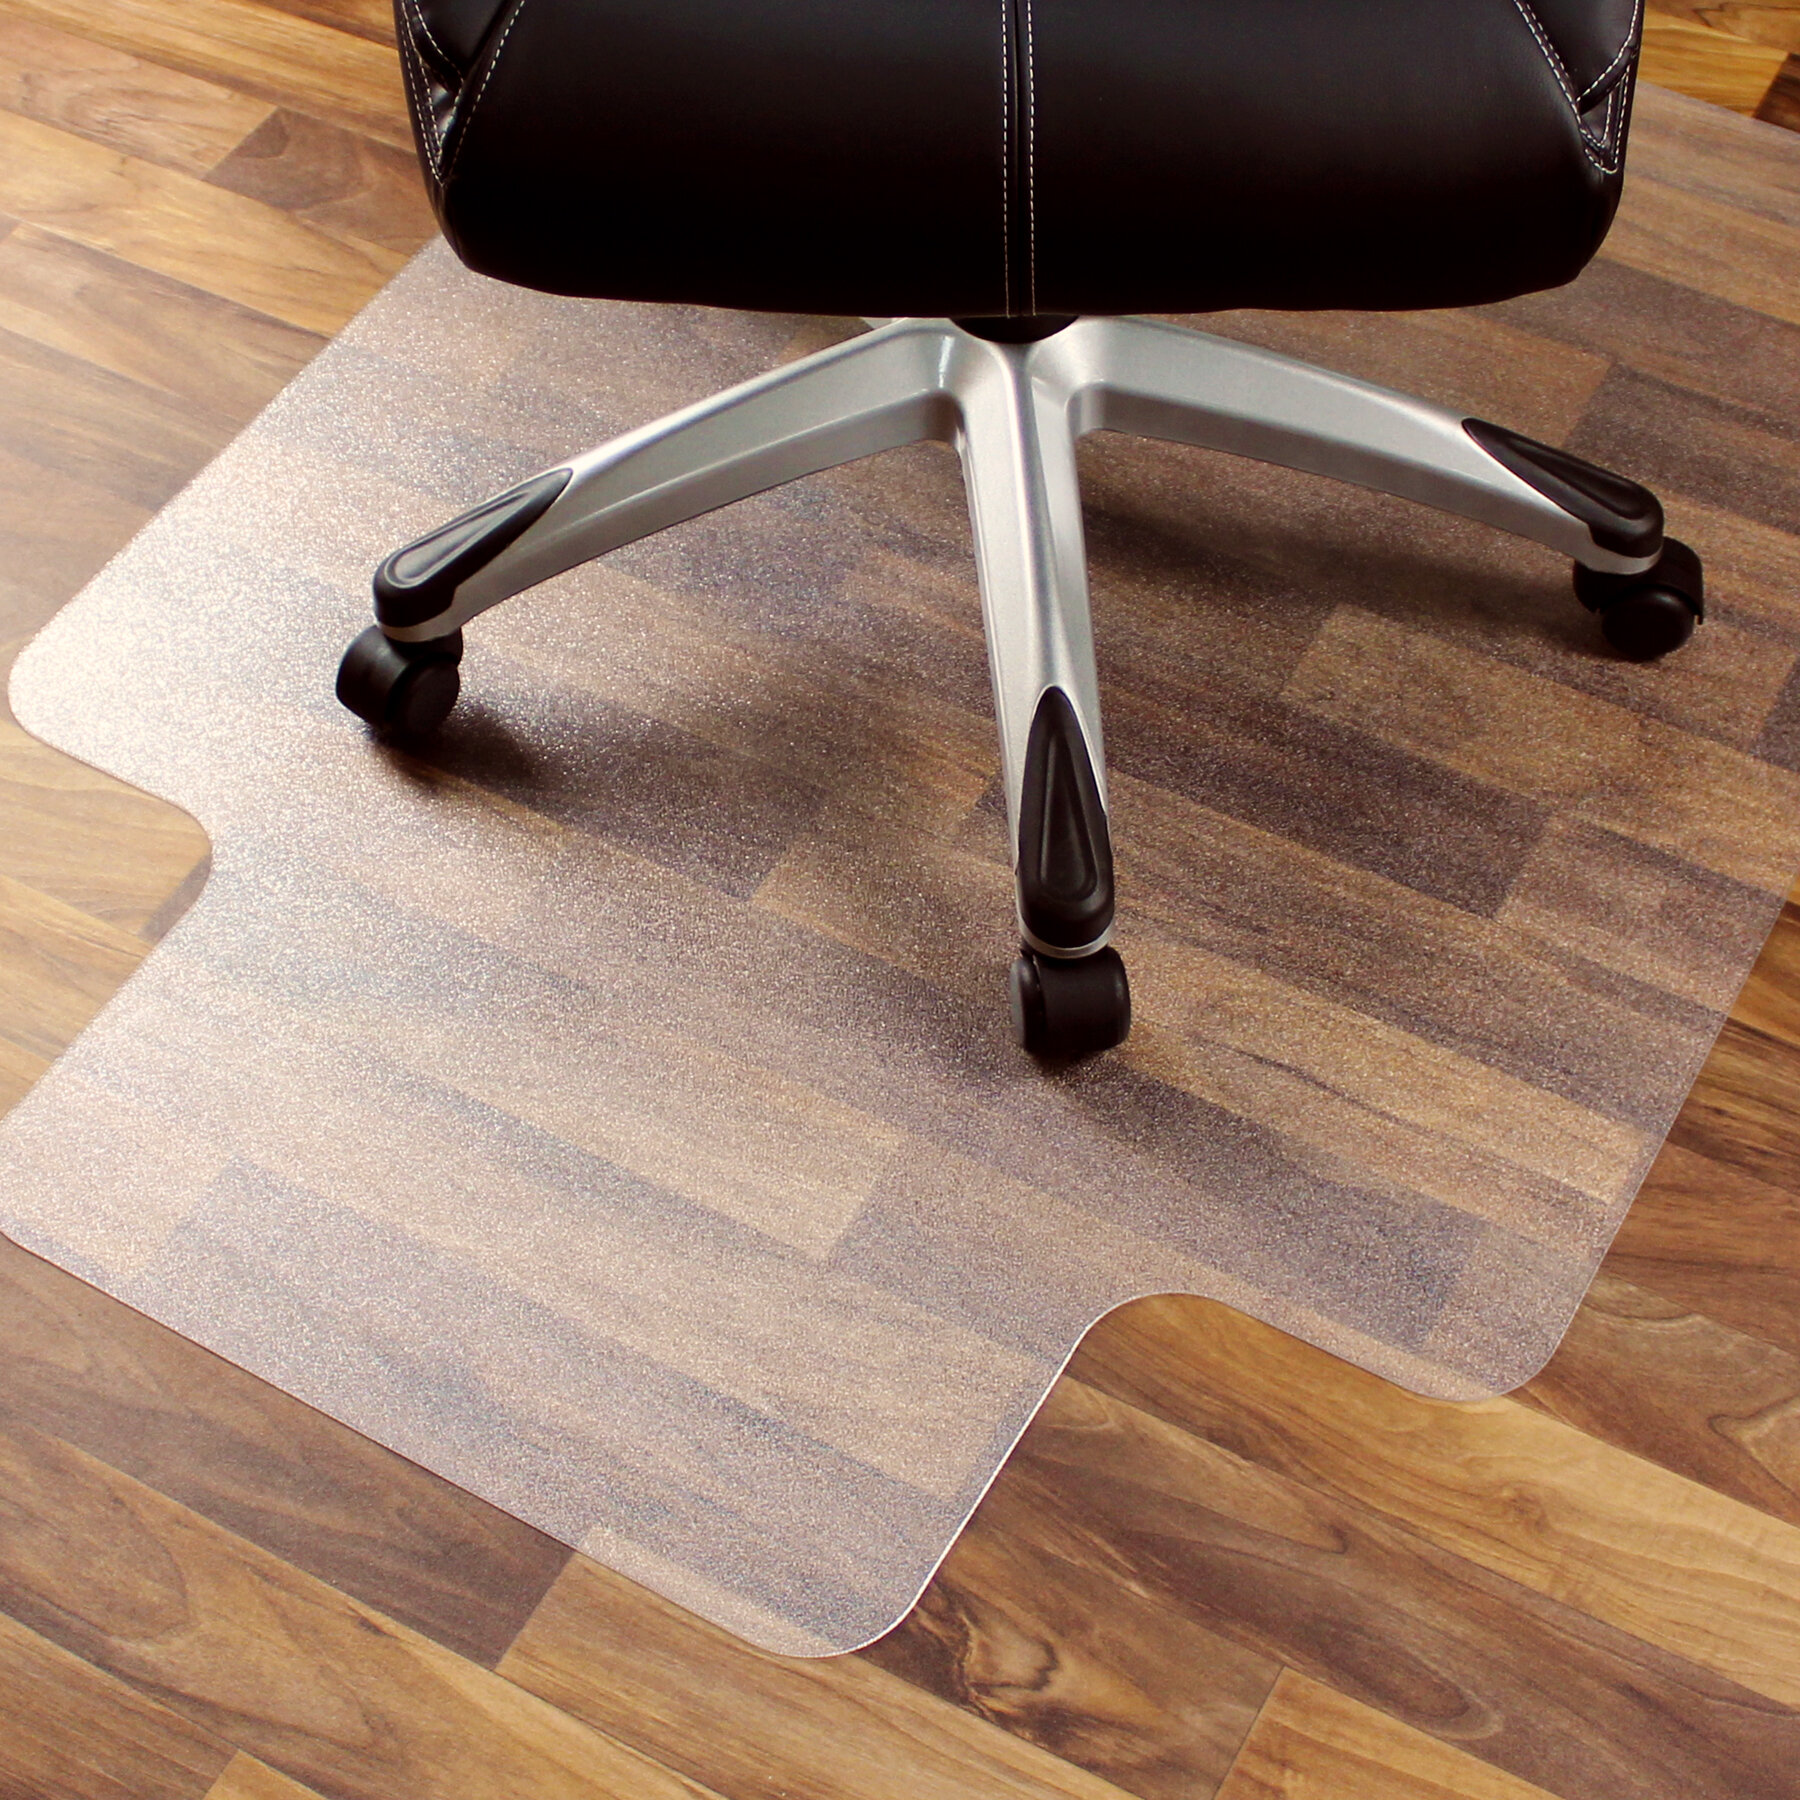 Basics Polycarbonate Extra Large Chair Mat for Hard Floors 59 x 118 